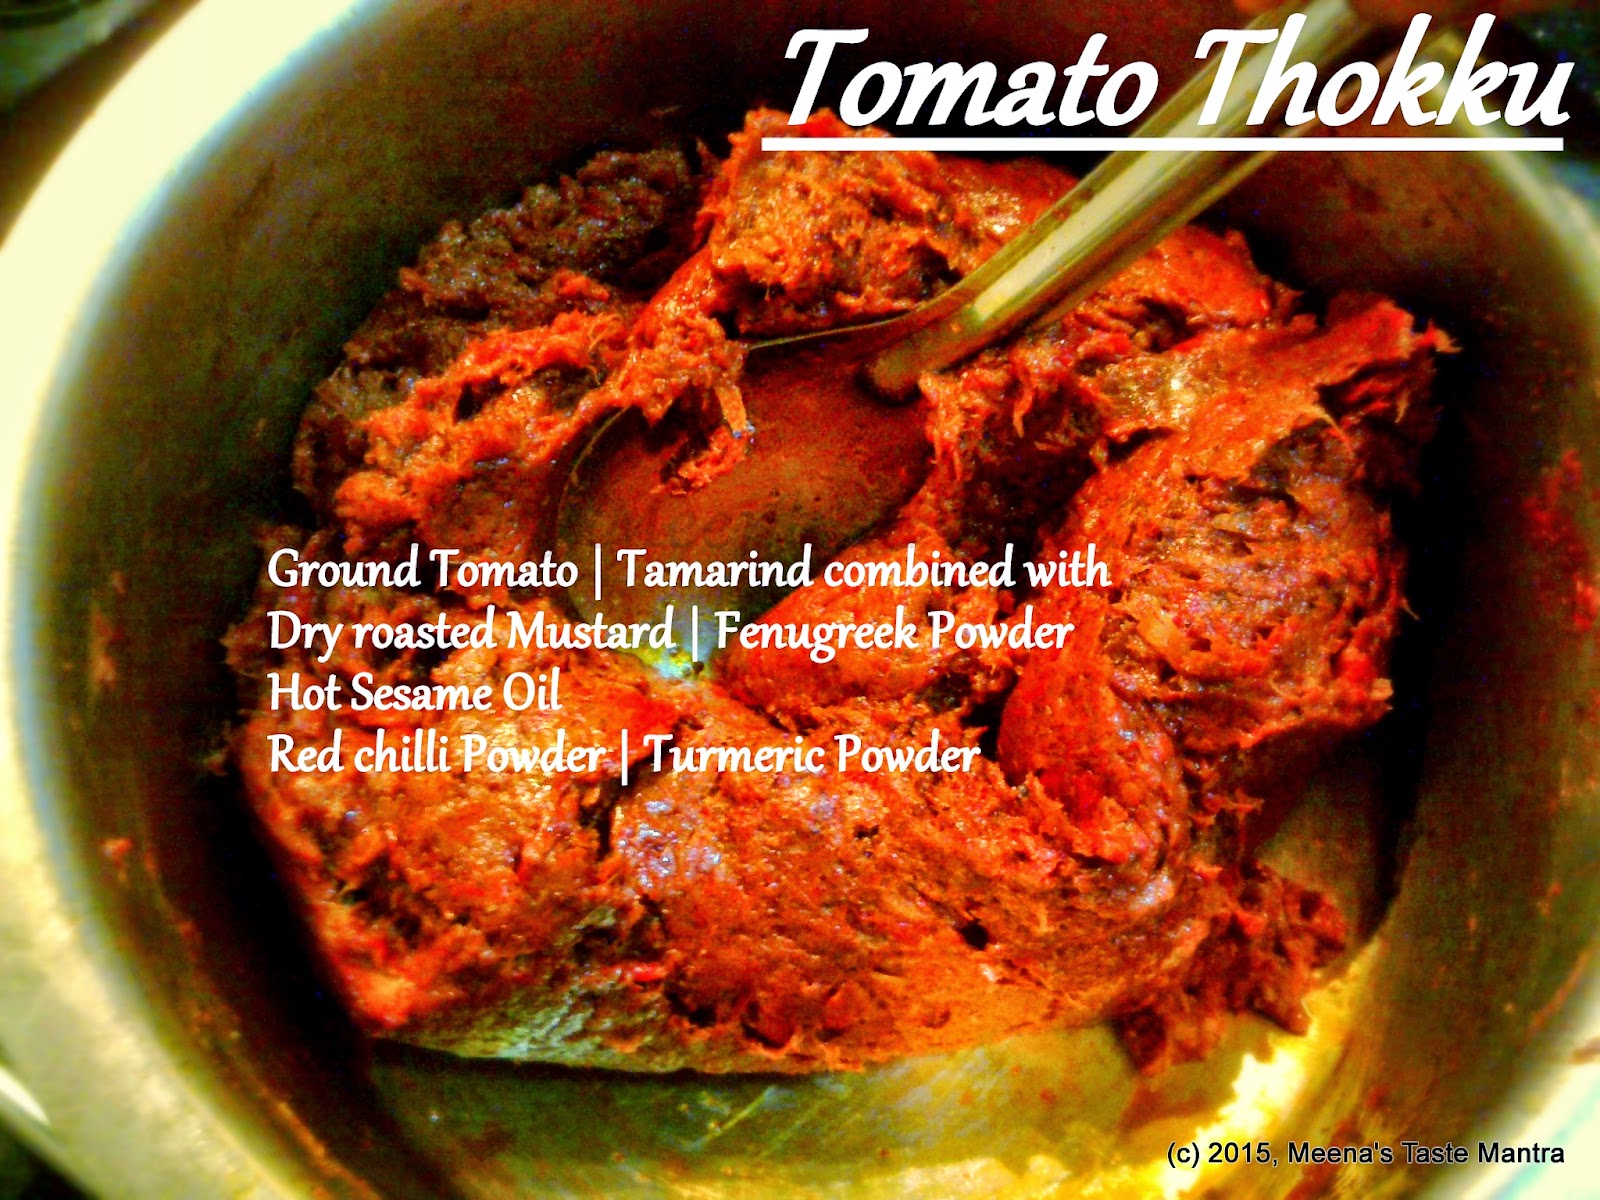 Tomato Thokku -  Final mix with spices and oil